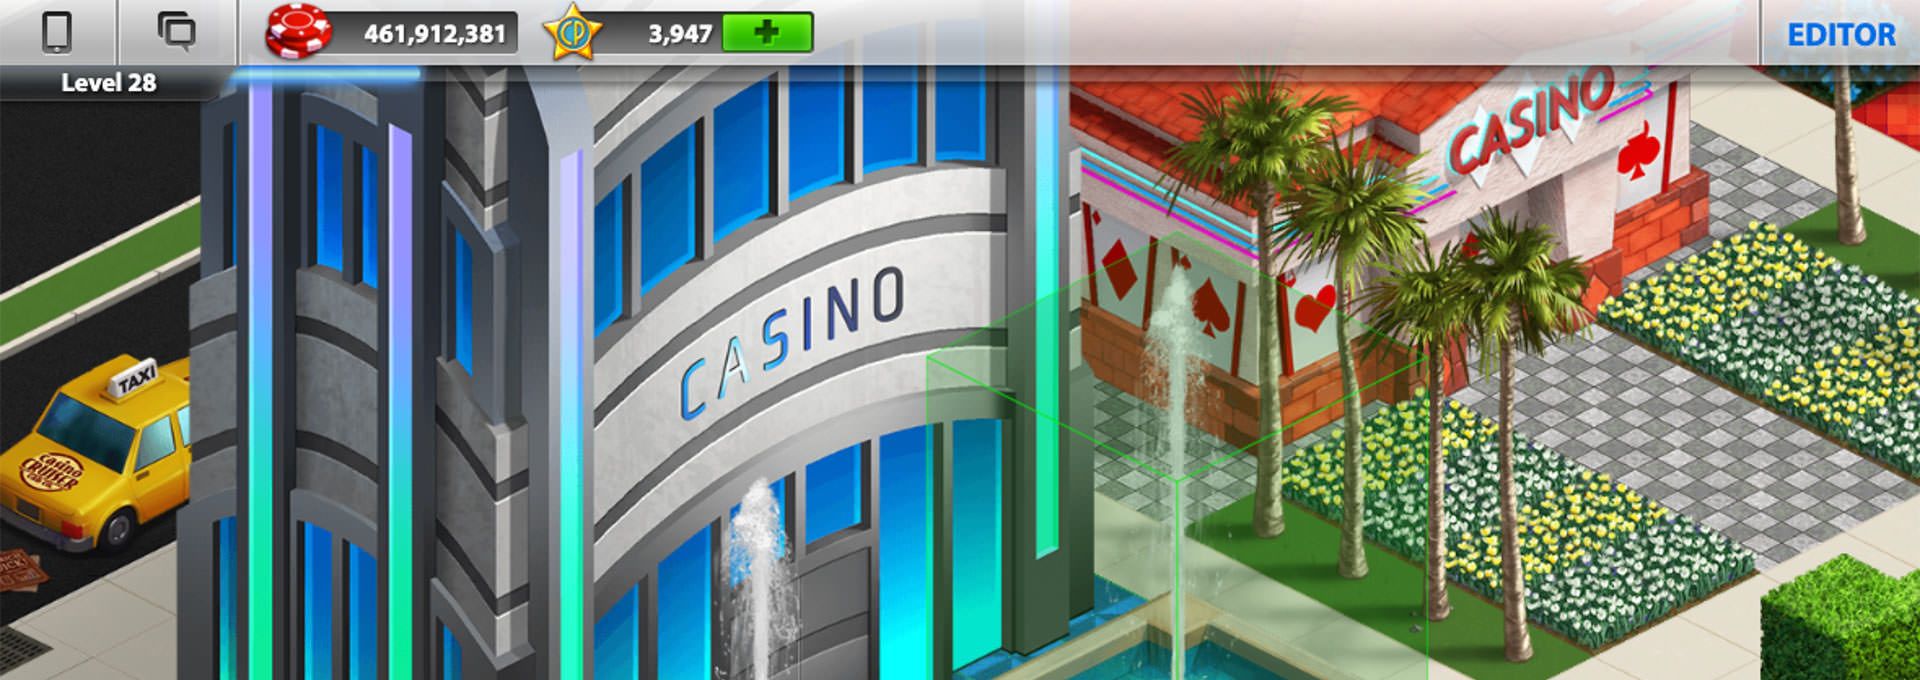 CasinoRPG Launches on iOS and Android